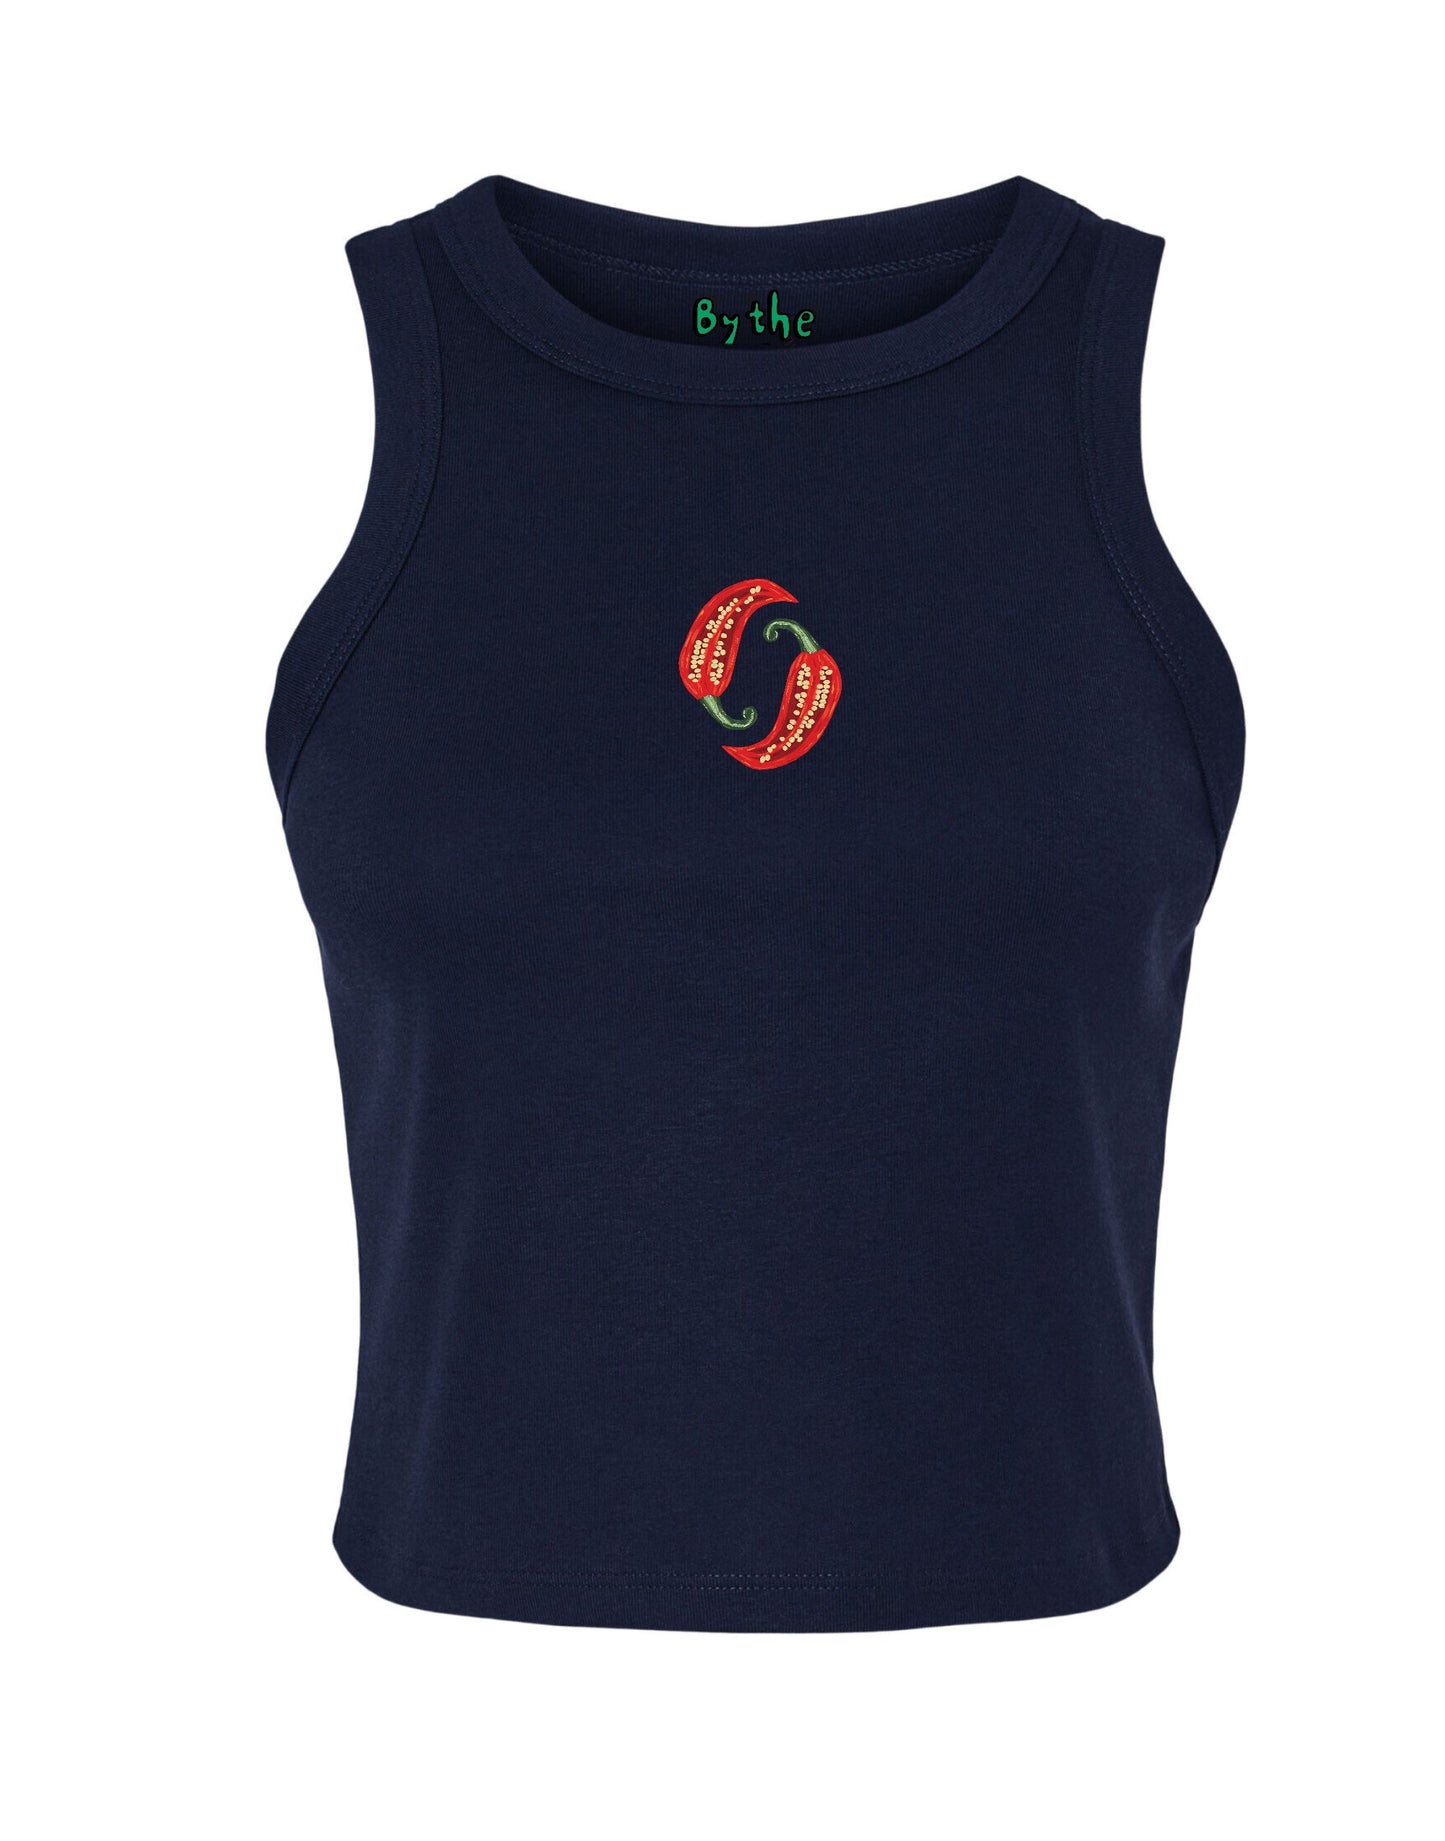 Navy Racer Top SMALL